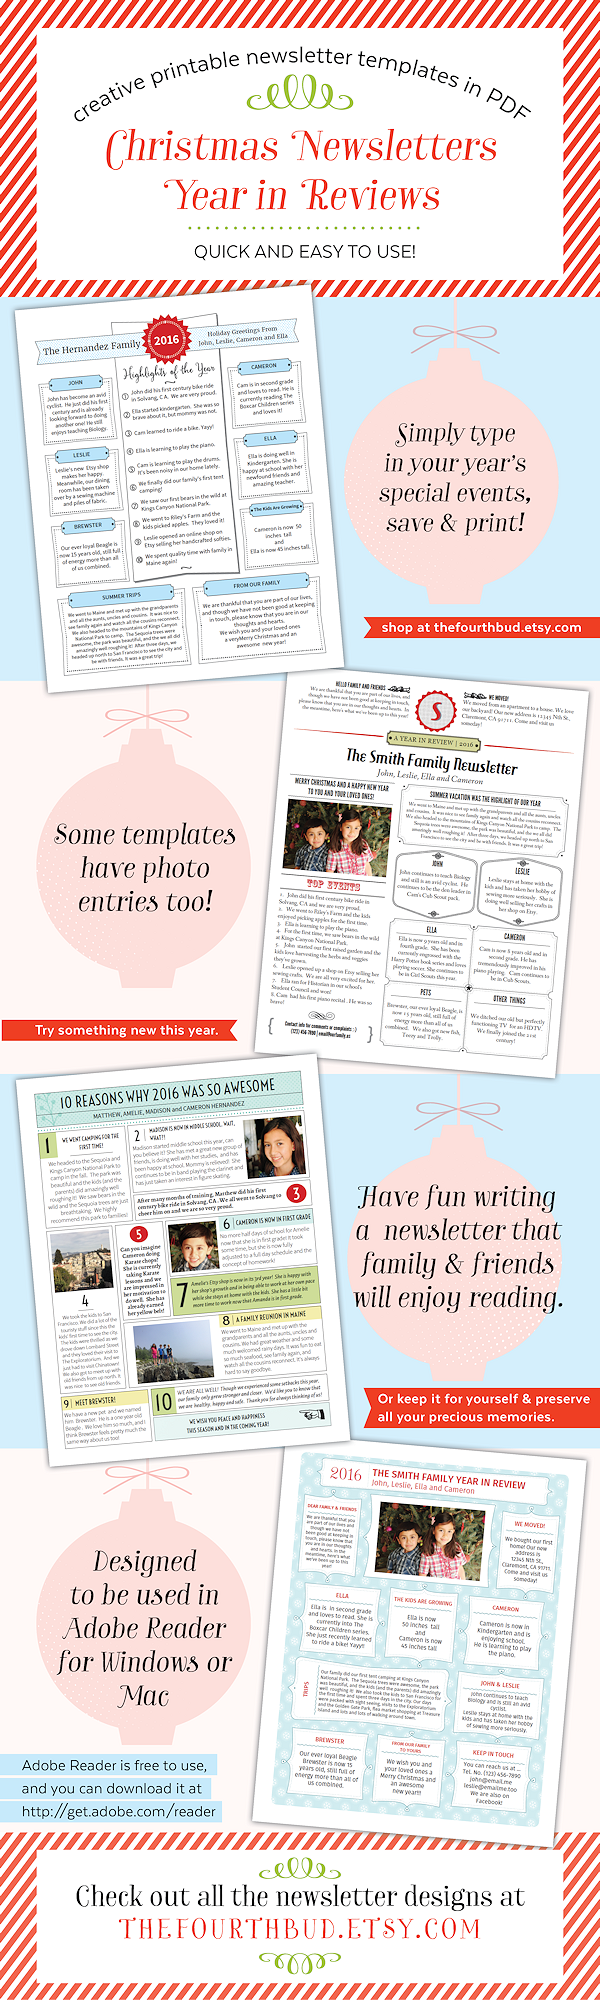 Christmas Newsletters and Year in Reviews